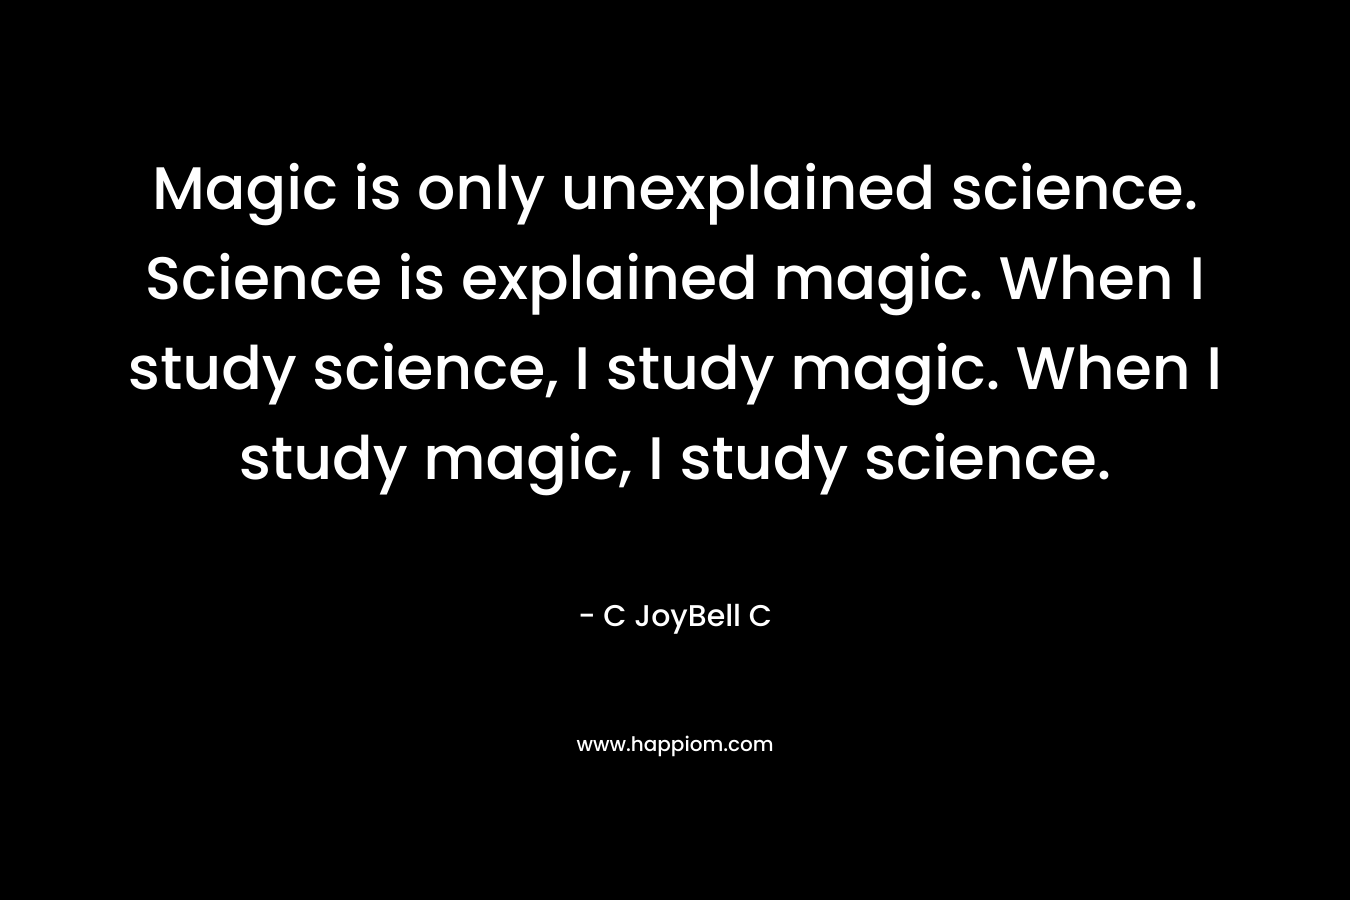 Magic is only unexplained science. Science is explained magic. When I study science, I study magic. When I study magic, I study science.